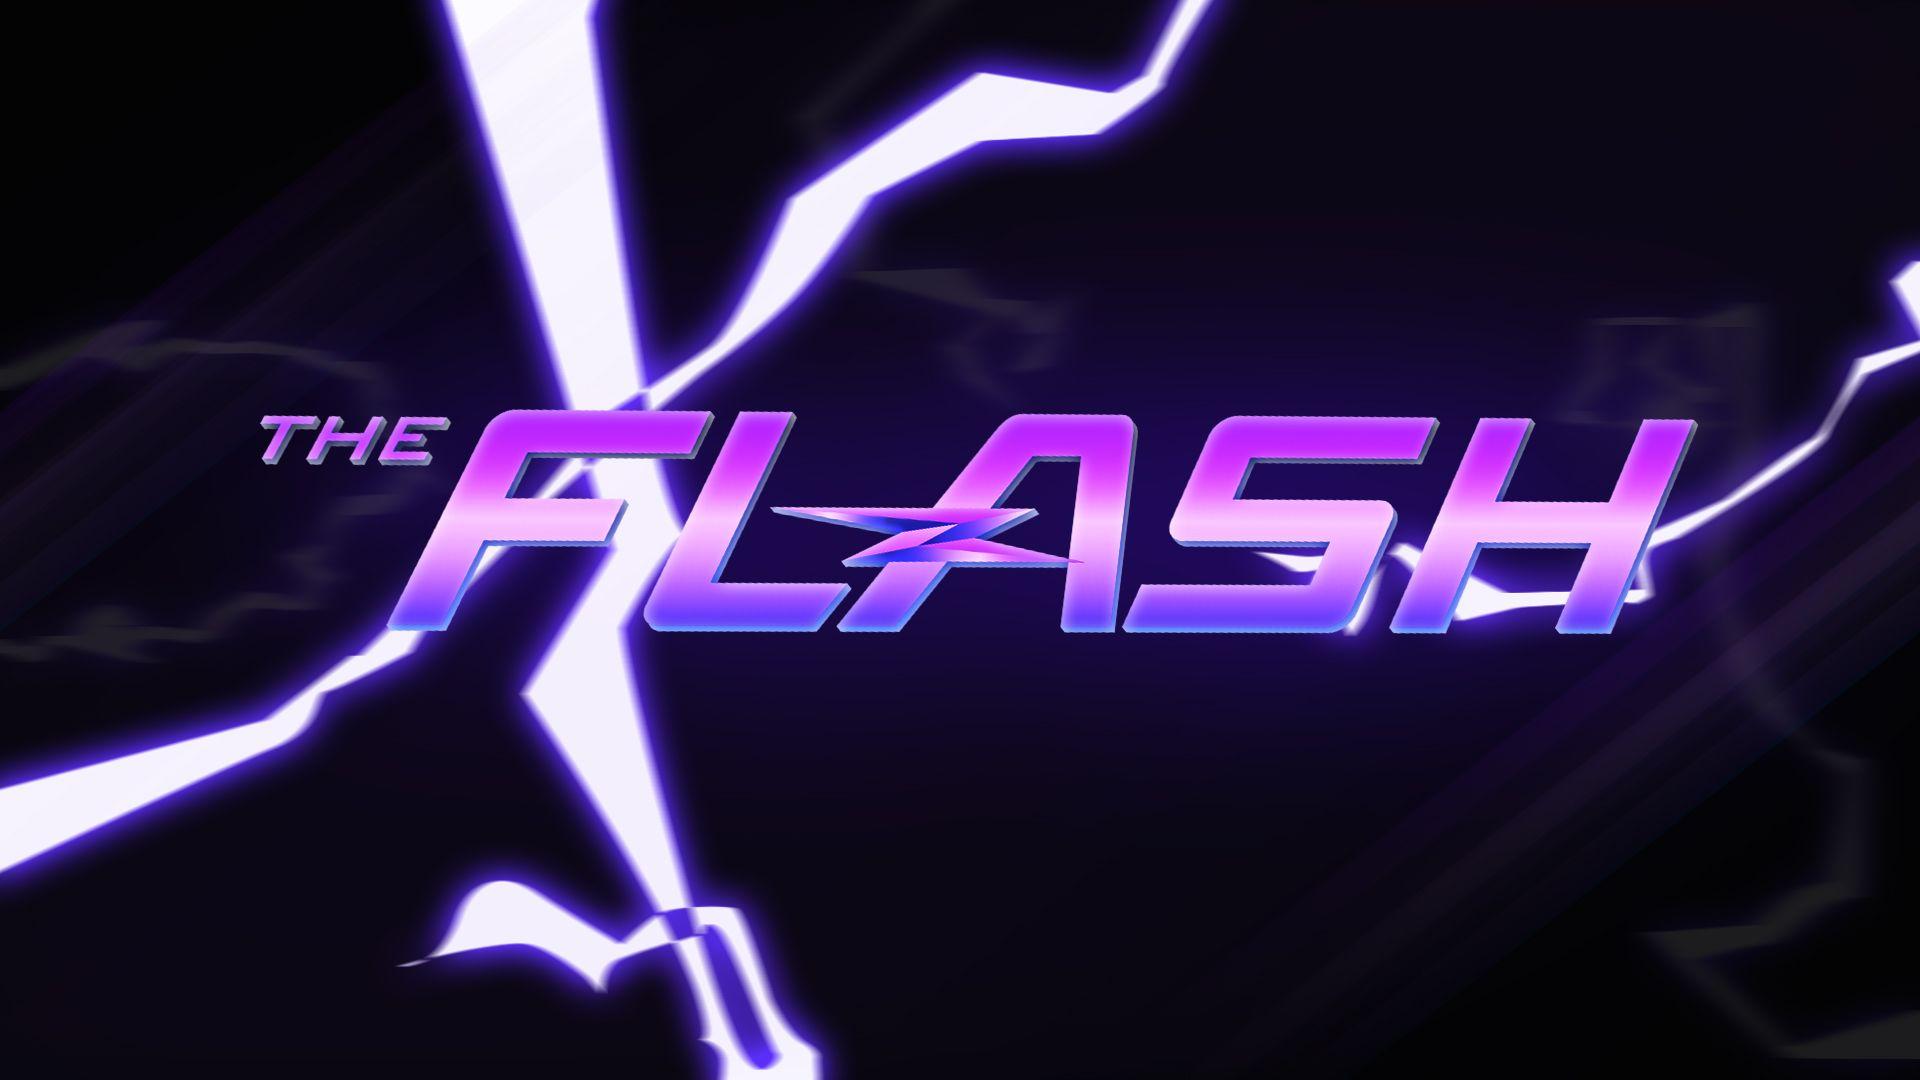 Blue Flash Logo - CW's The Flash Logo Desktop Wallpaper from the show intro